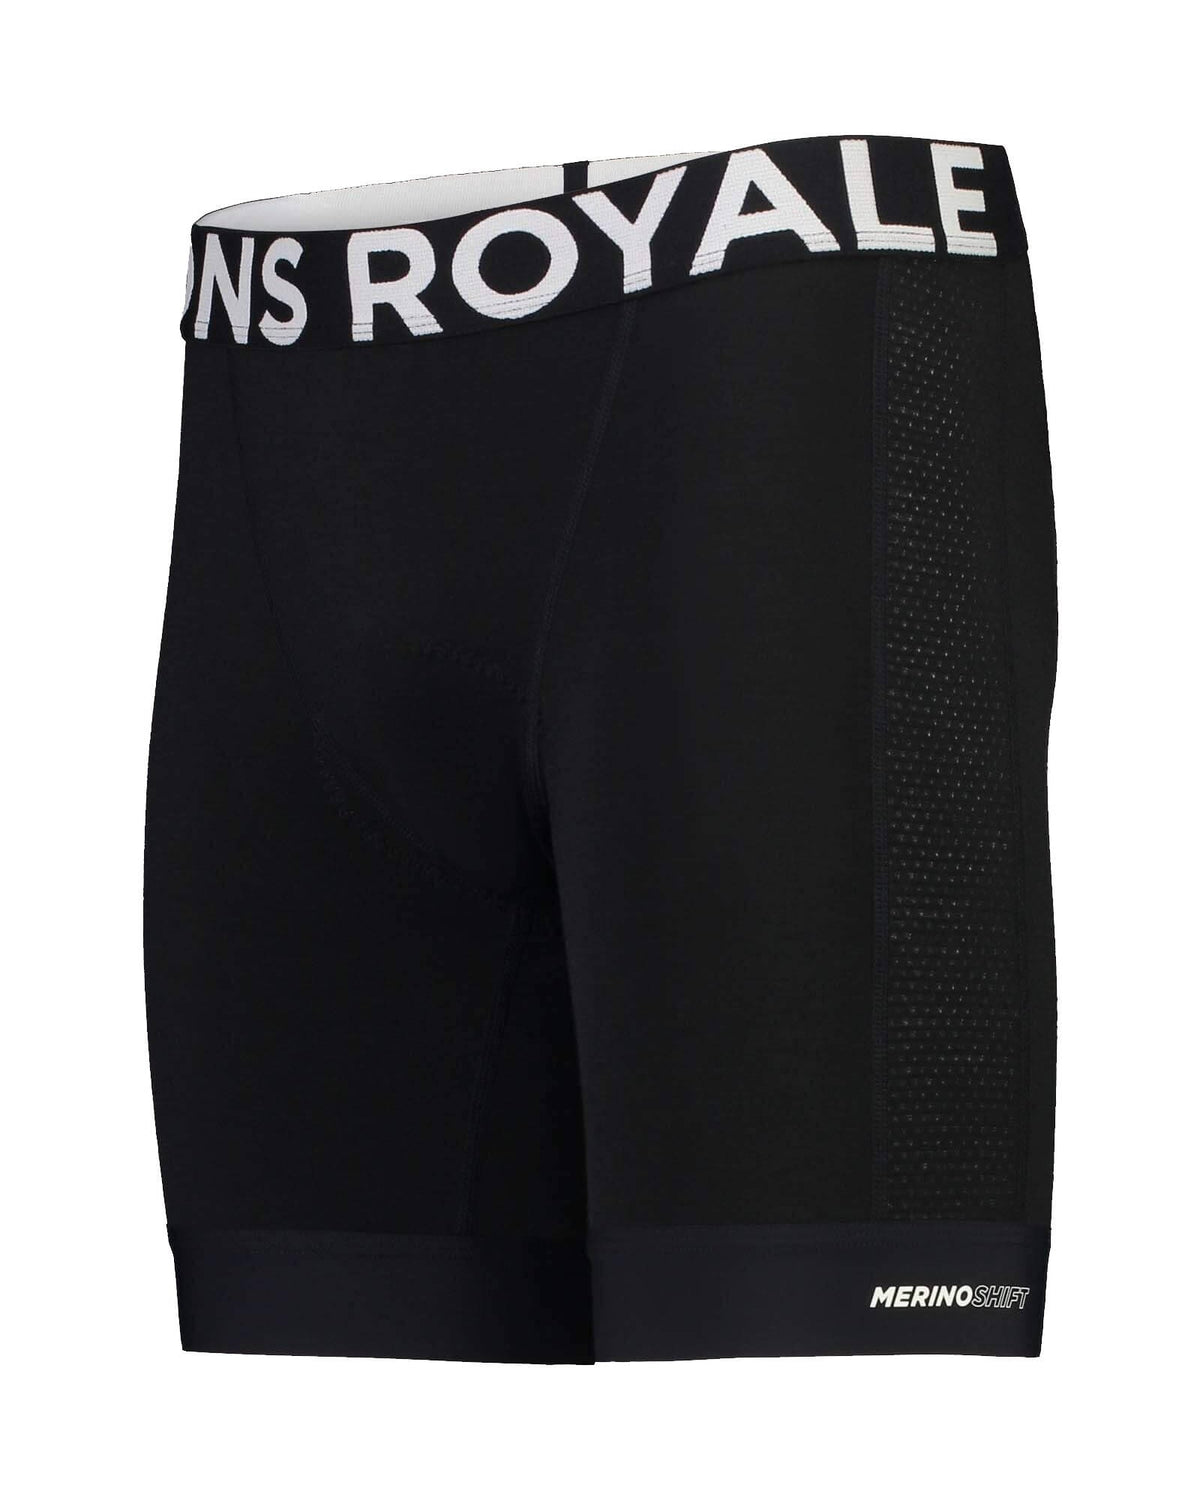 Mons Royale - Cyling Clothing and Ski Clothing – Oberson